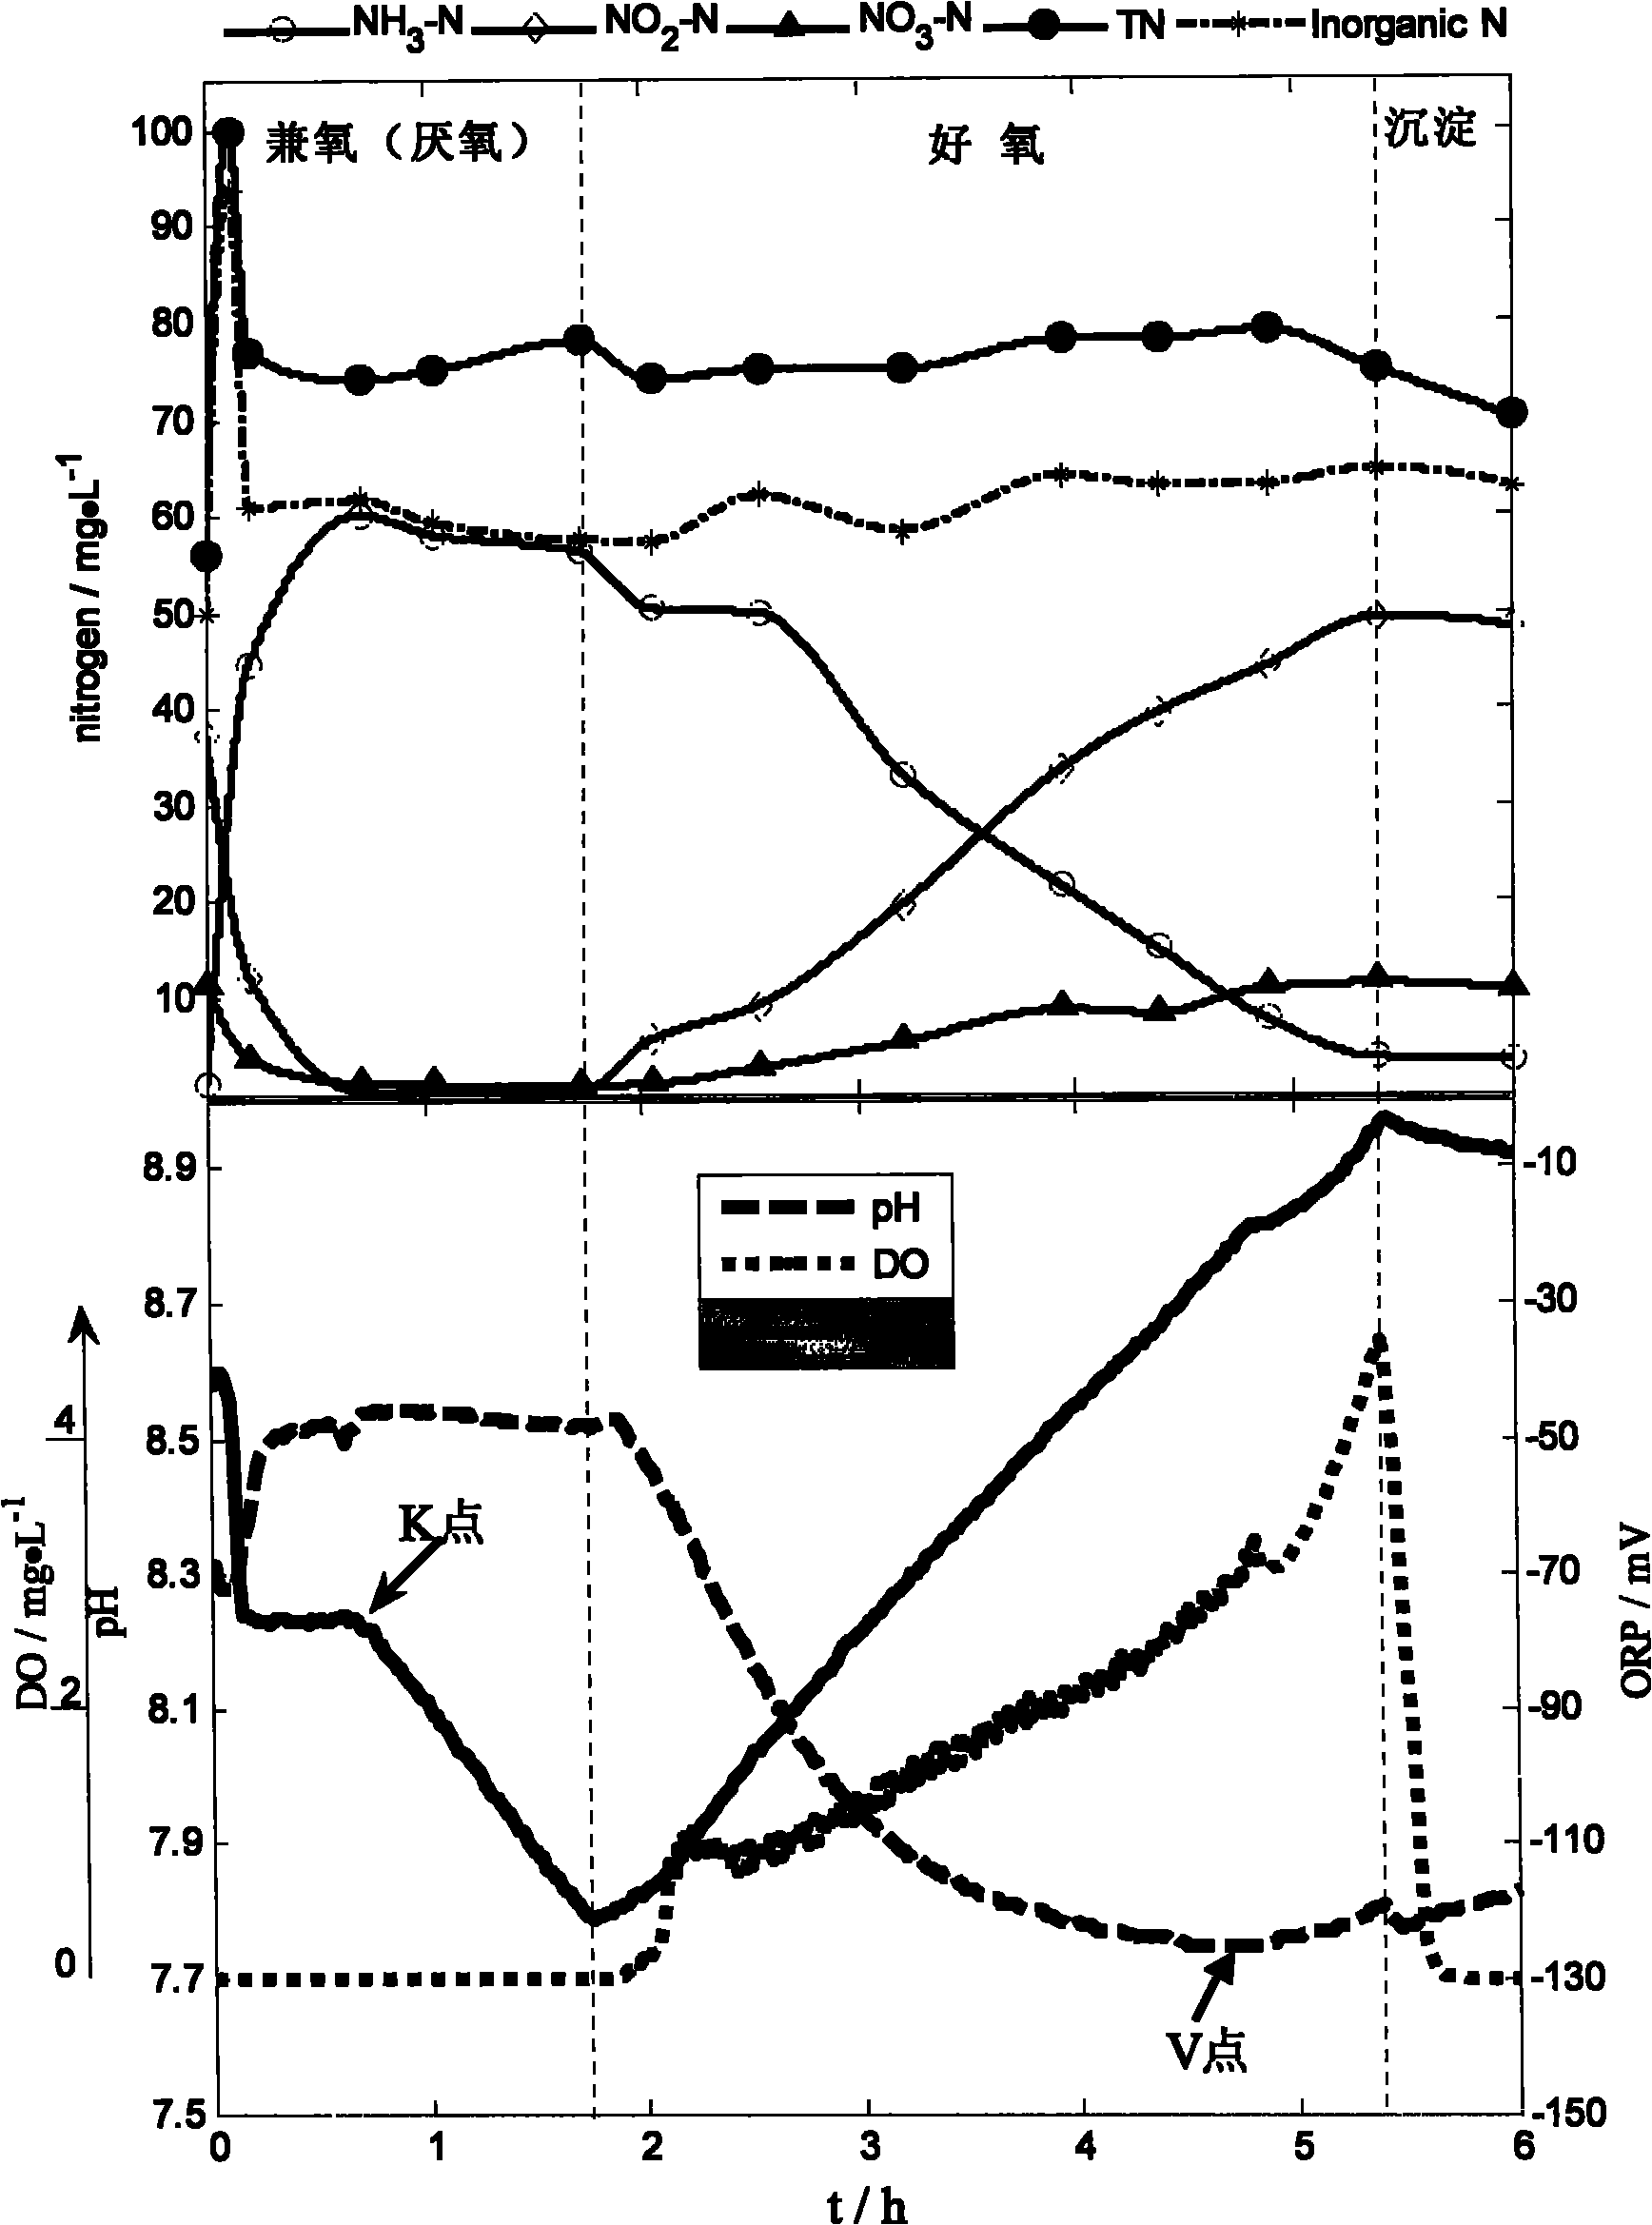 Method for realizing SBR nitrosation-denitrosation at low temperature by optimally controlling aeration time